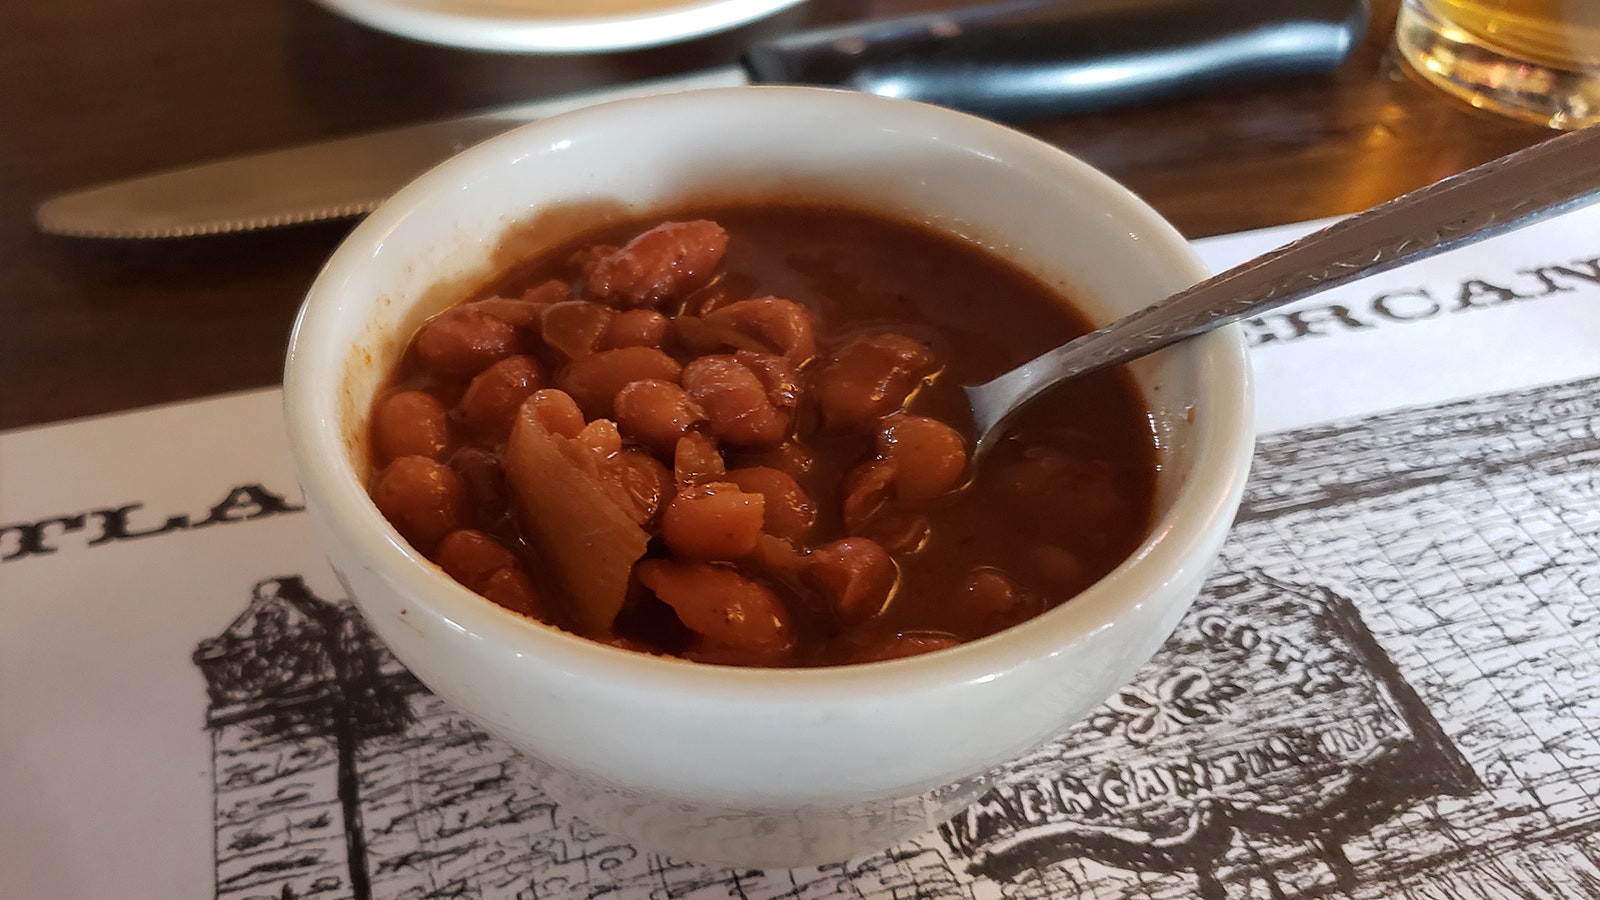 The famous "secret recipe" Cowboy Beans have a slightly sweet taste with a bit of smoke and heat.